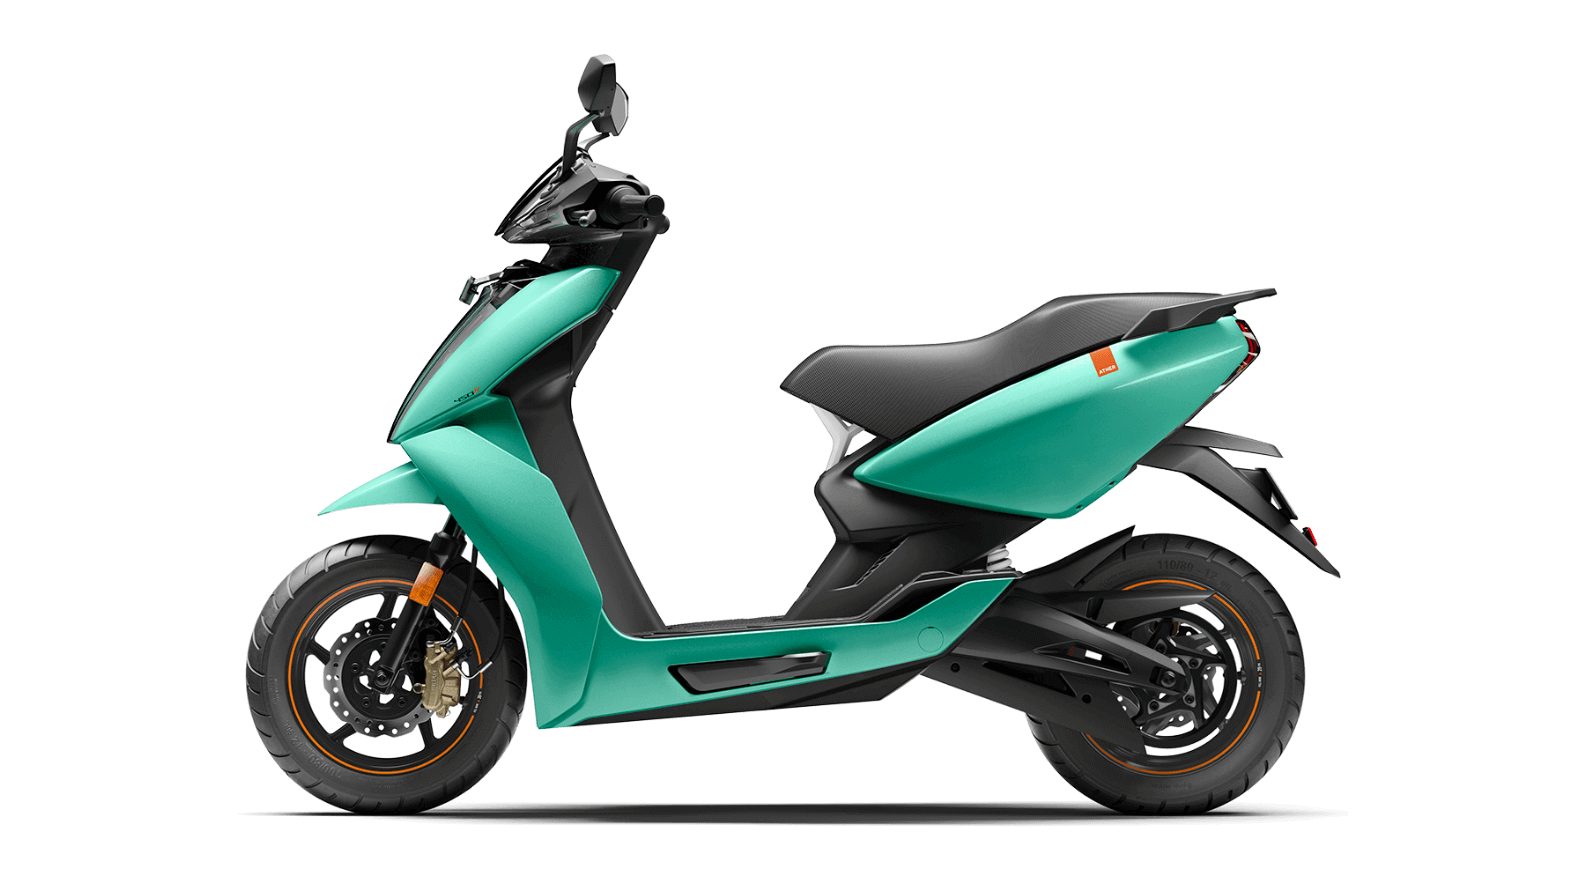 The Ather 450X's price in Mumbai has been slashed by Rs 20,000. Image: Ather Energy